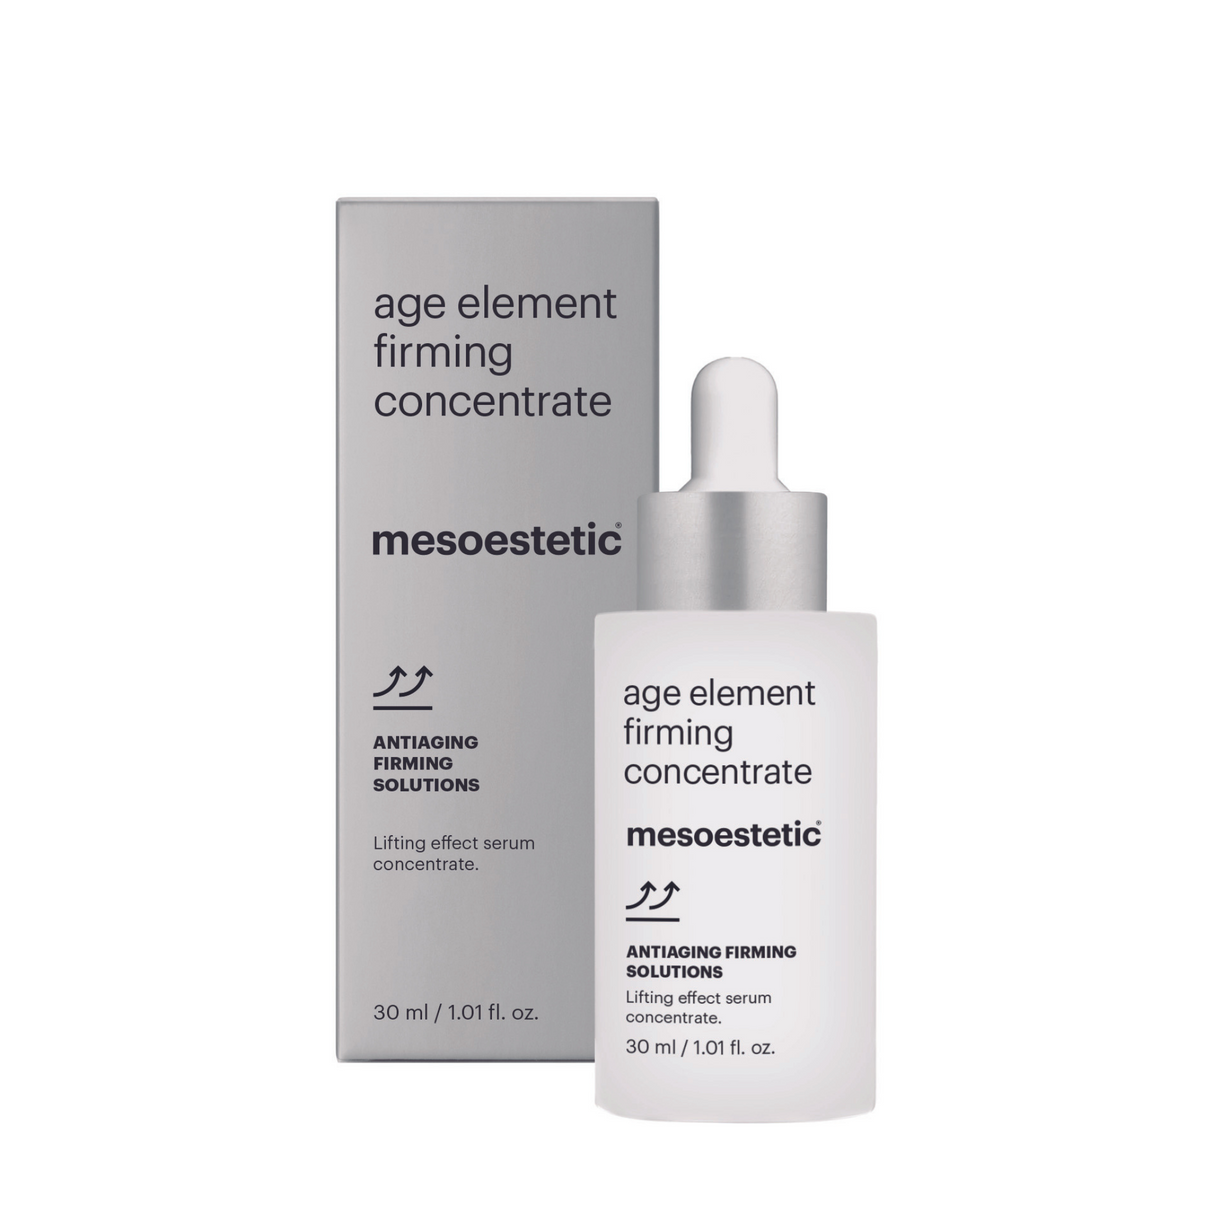 age element firming concentrate | Concentrated serum with lifting effect | 30 ml